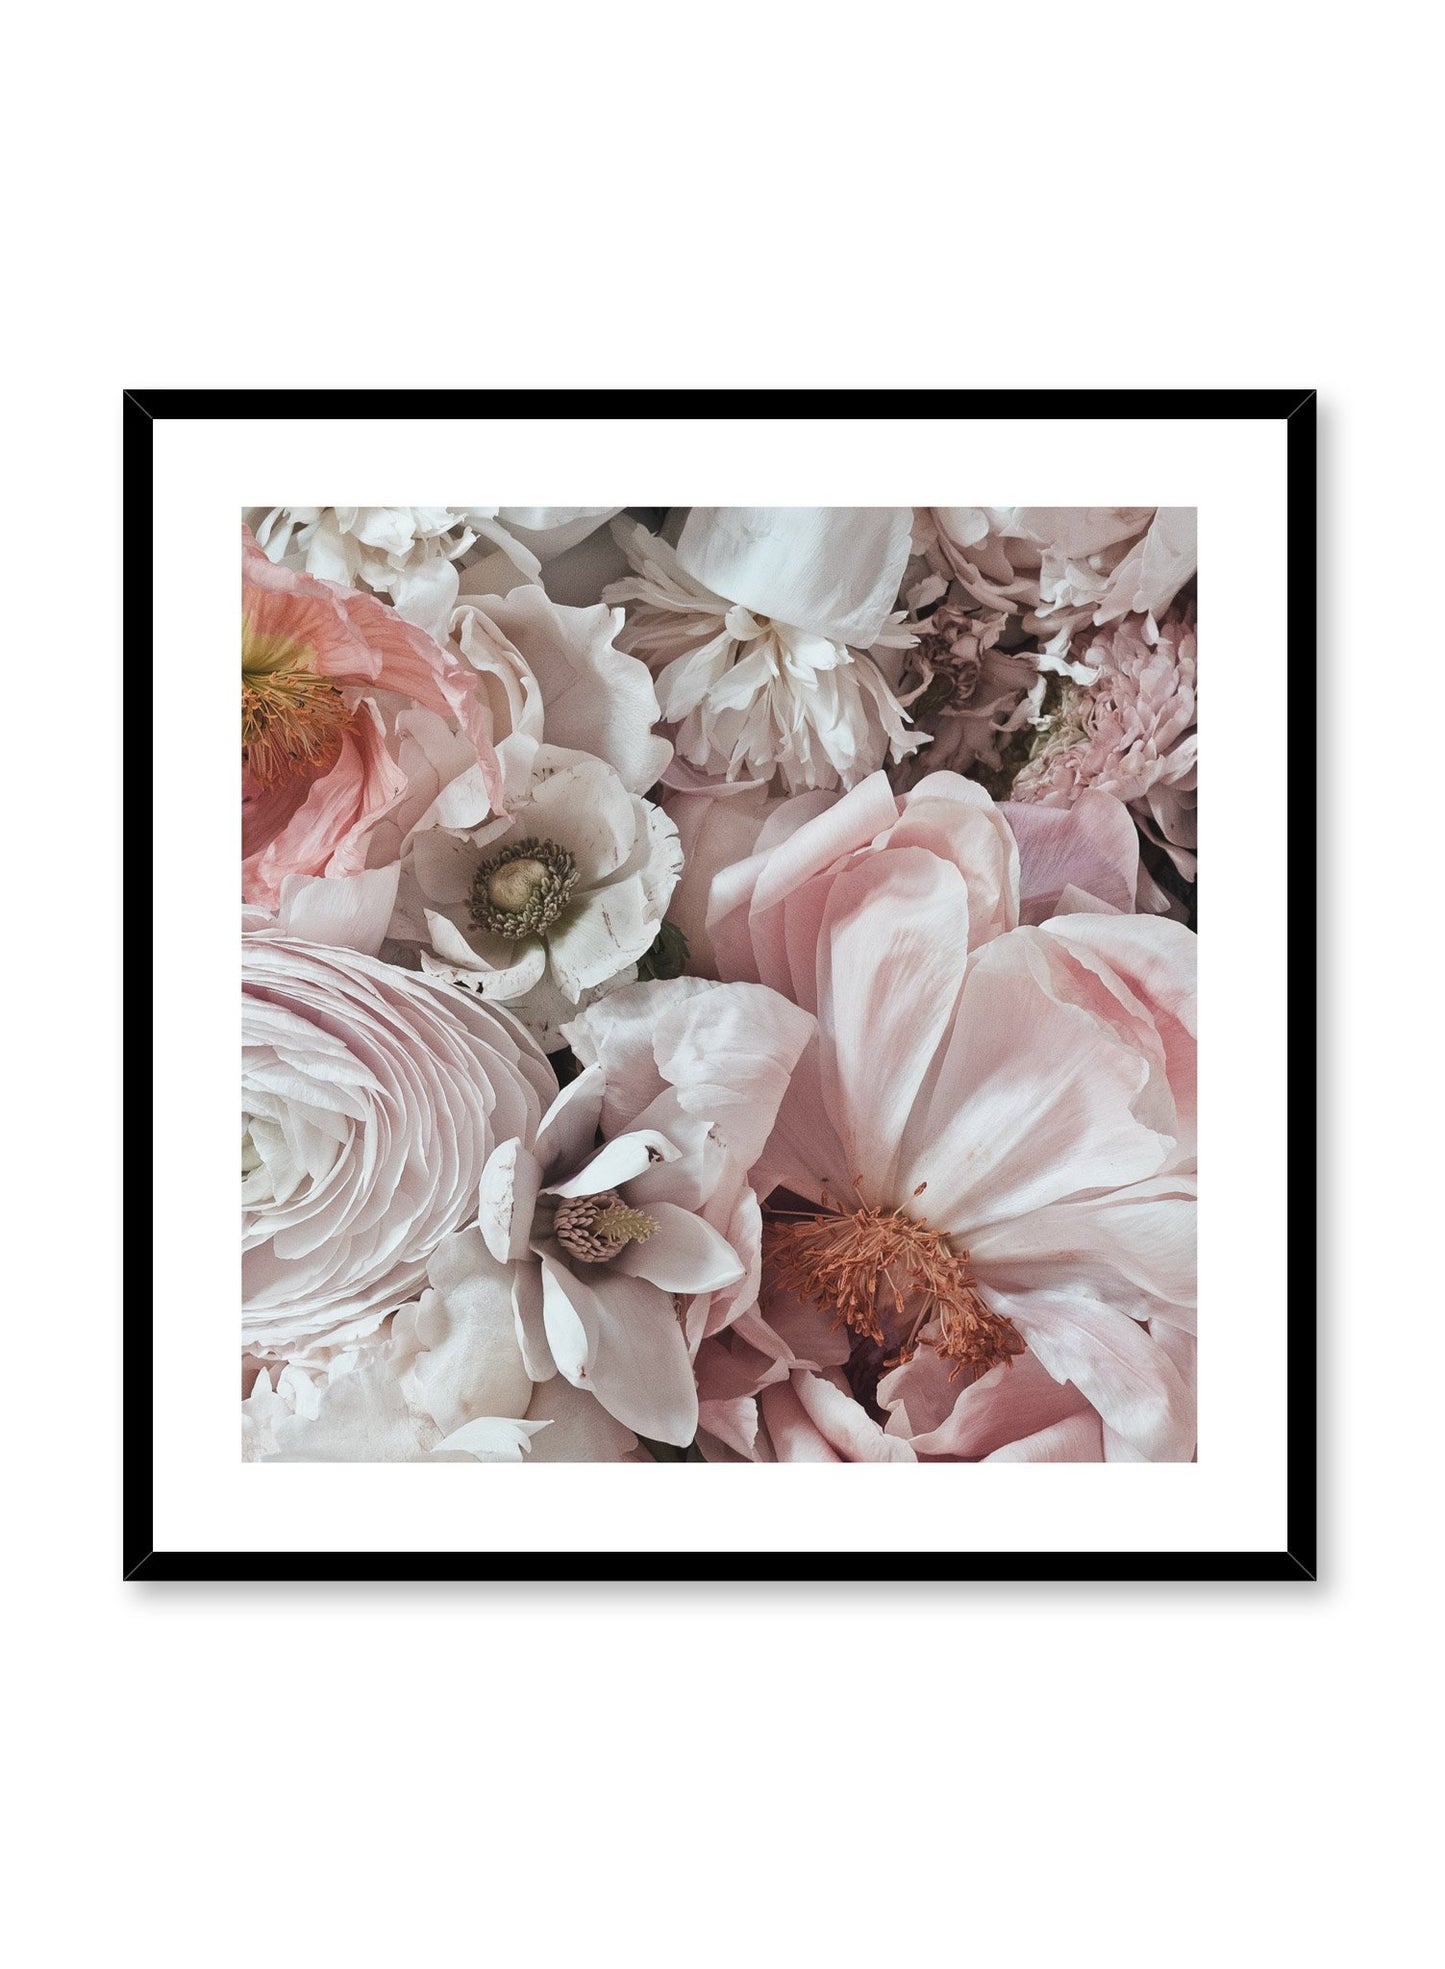 Minimalist design floral photography squared poster of Petals by Love Warriors Creative Studio - Buy at Opposite Wall